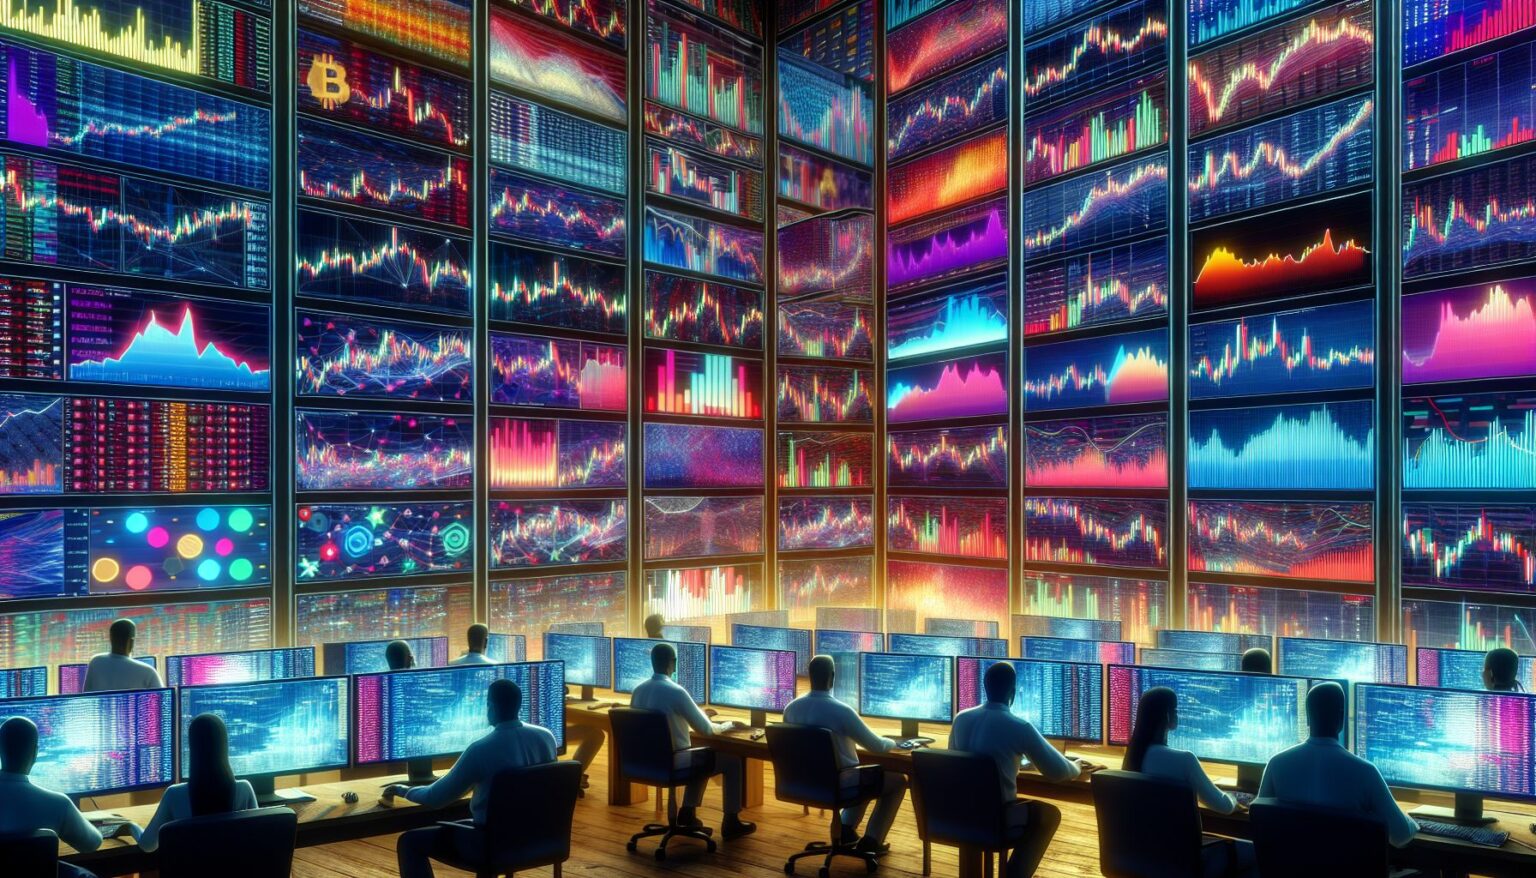 cryptocurrency trading charts and graphs on computer screens with traders analyzing data